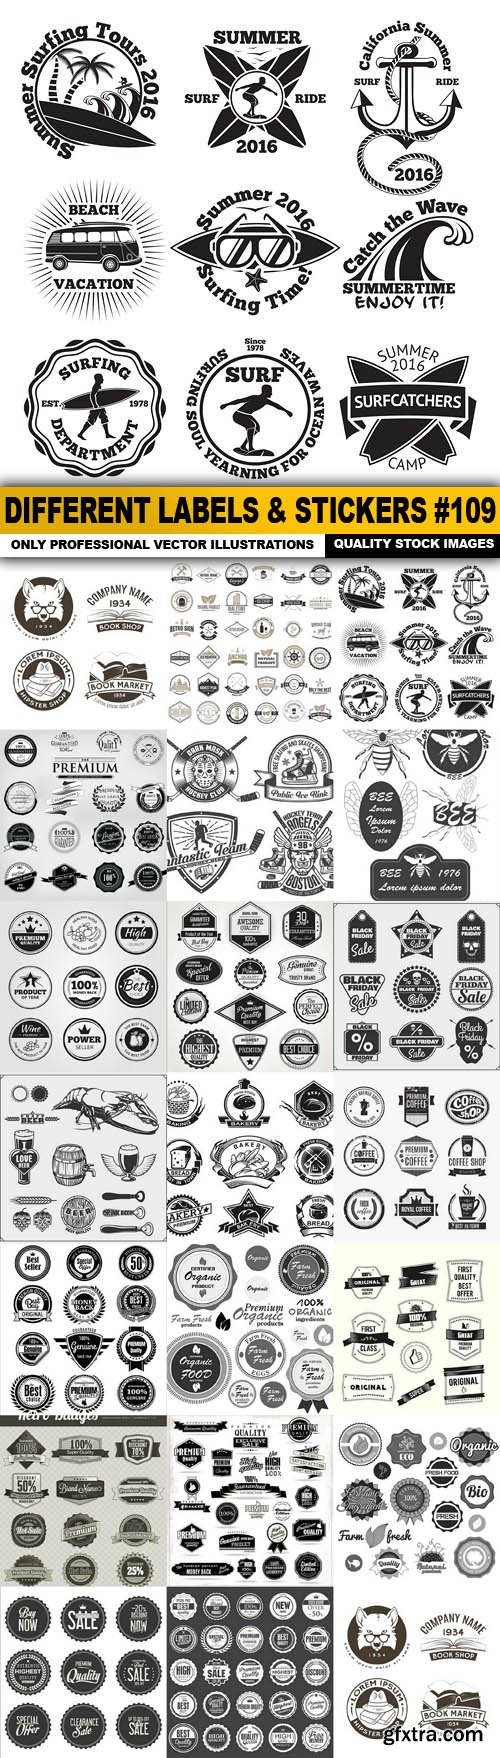 Different Labels & Stickers #109 - 20 Vector